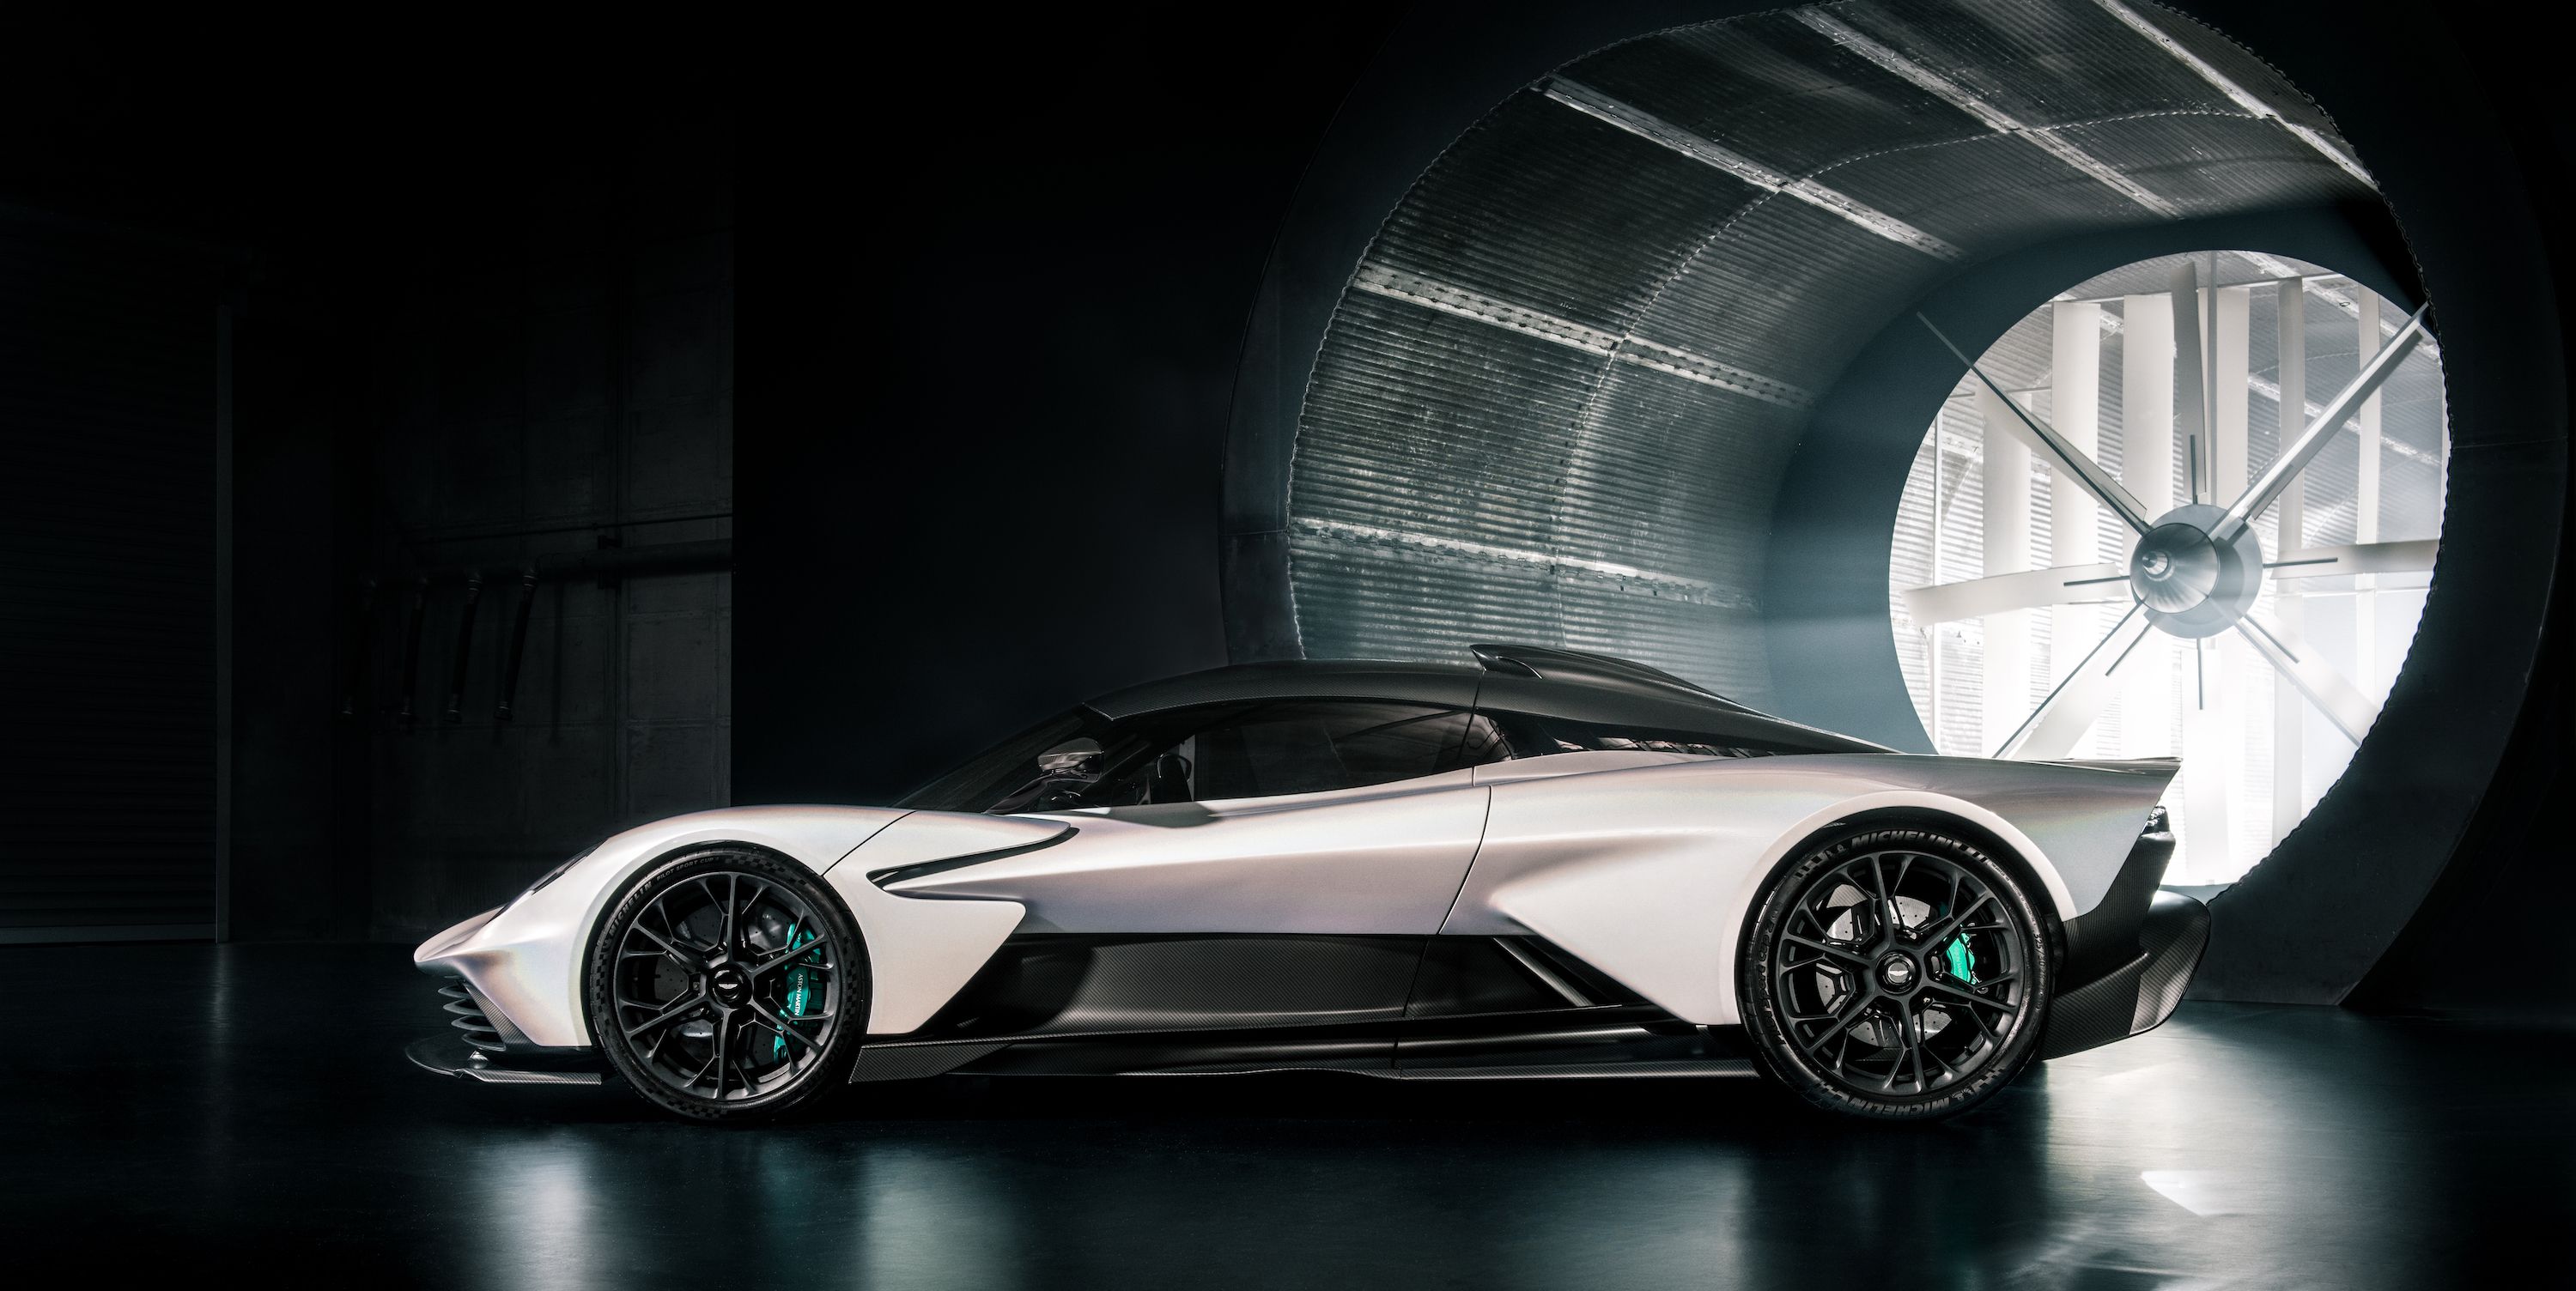 Aston Martin Switches Development From Electric Cars to Plug-in Hybrids